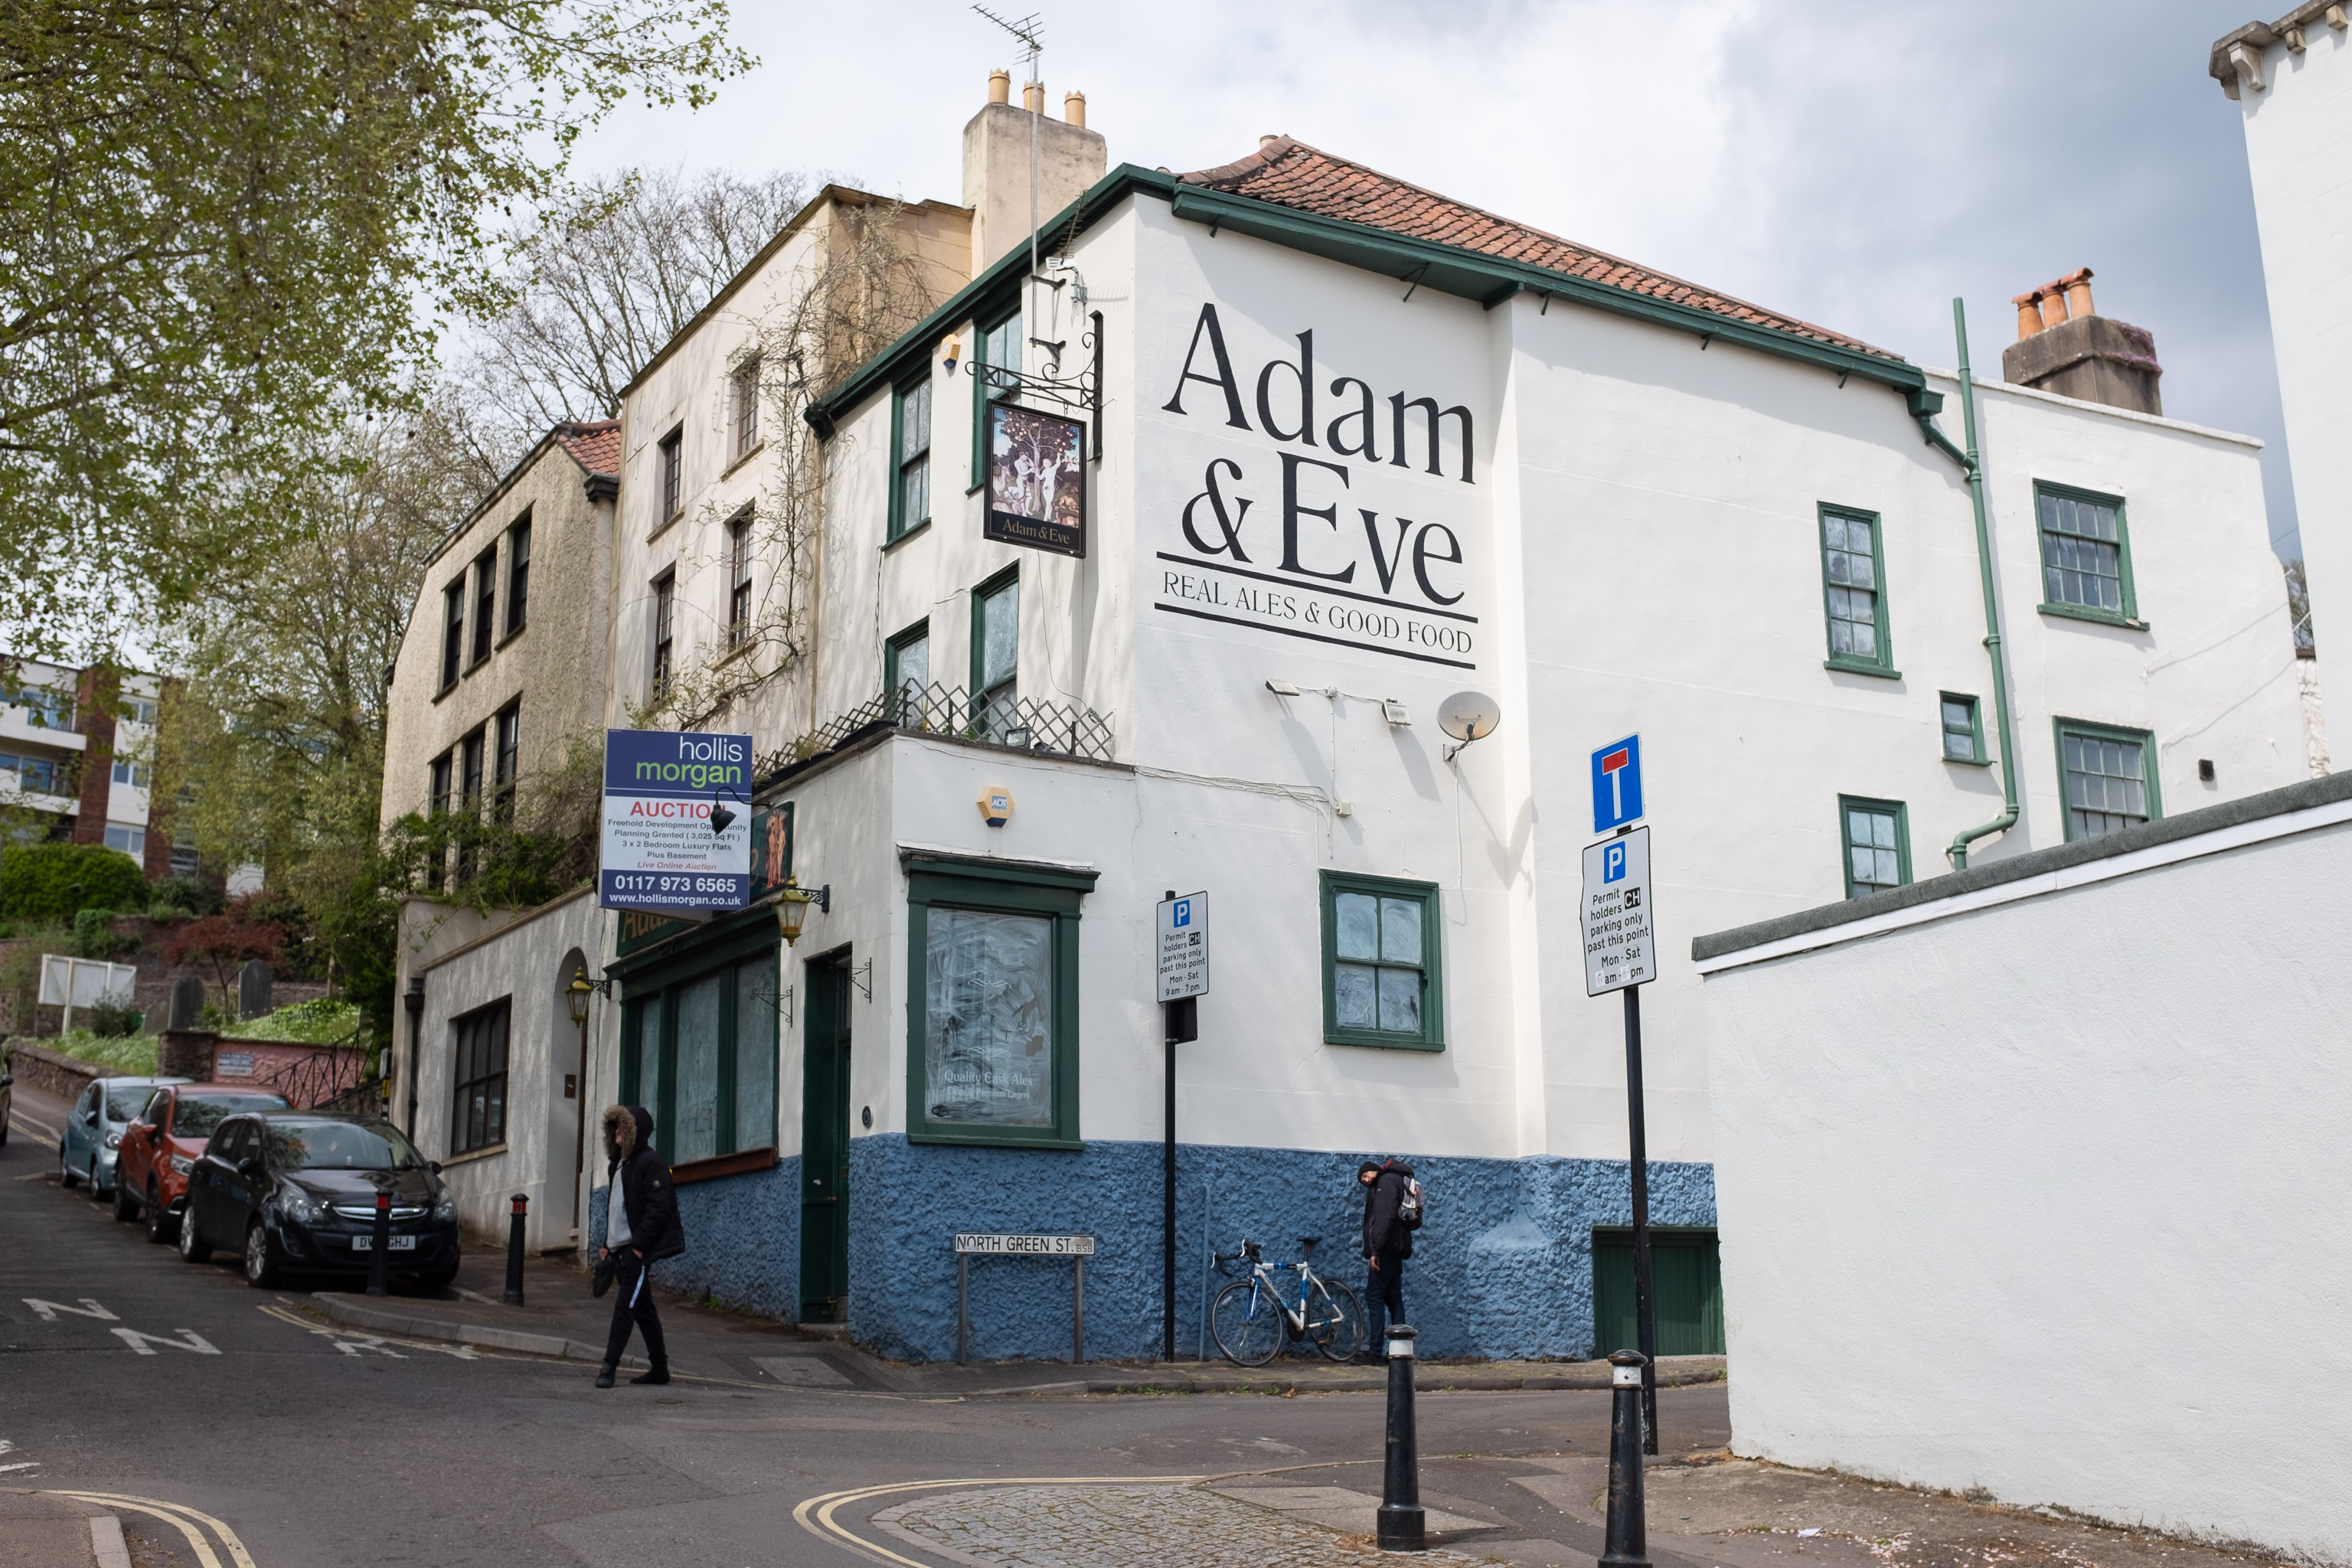 Adam & Eve
There's a community bid just starting to buy this mid-18th-Century pub and run it as a community pub/bakery/whatever rather than the current plan t...